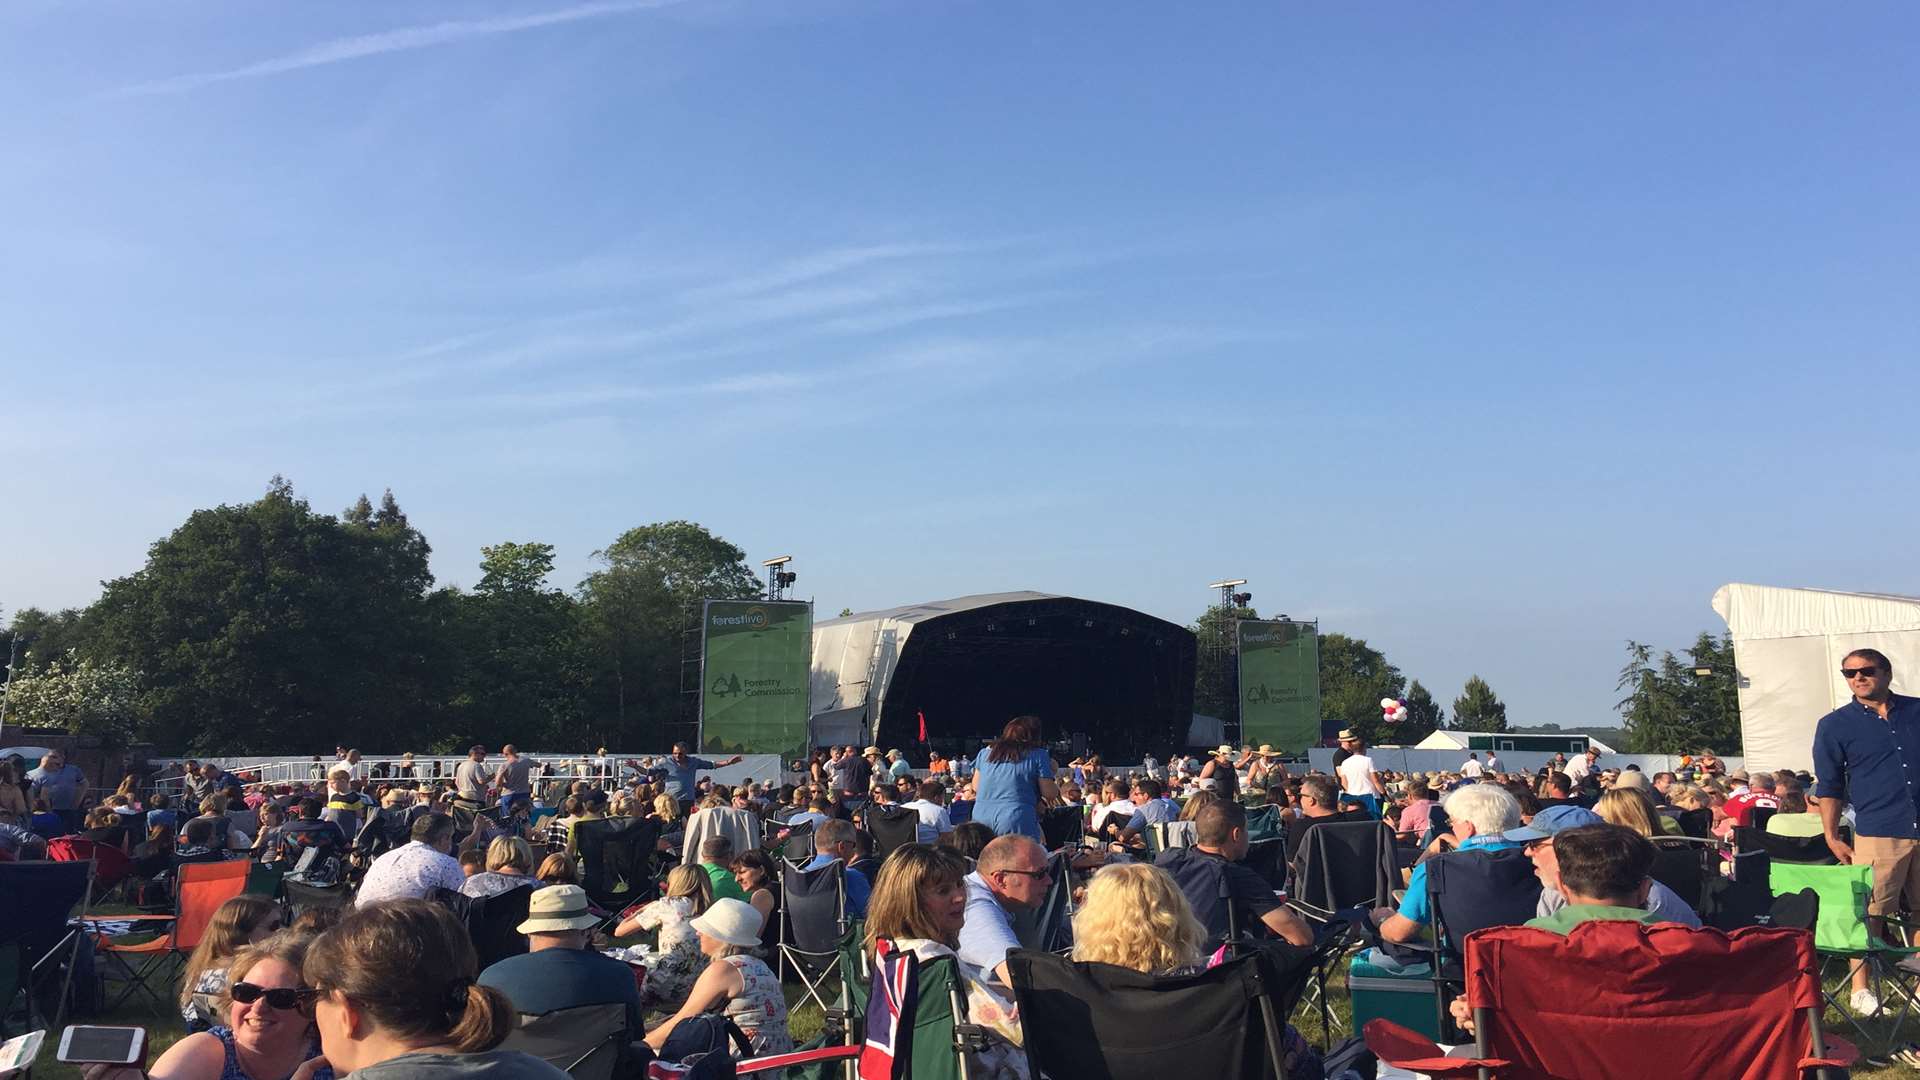 Elbow's date at Bedgebury was a sell-out